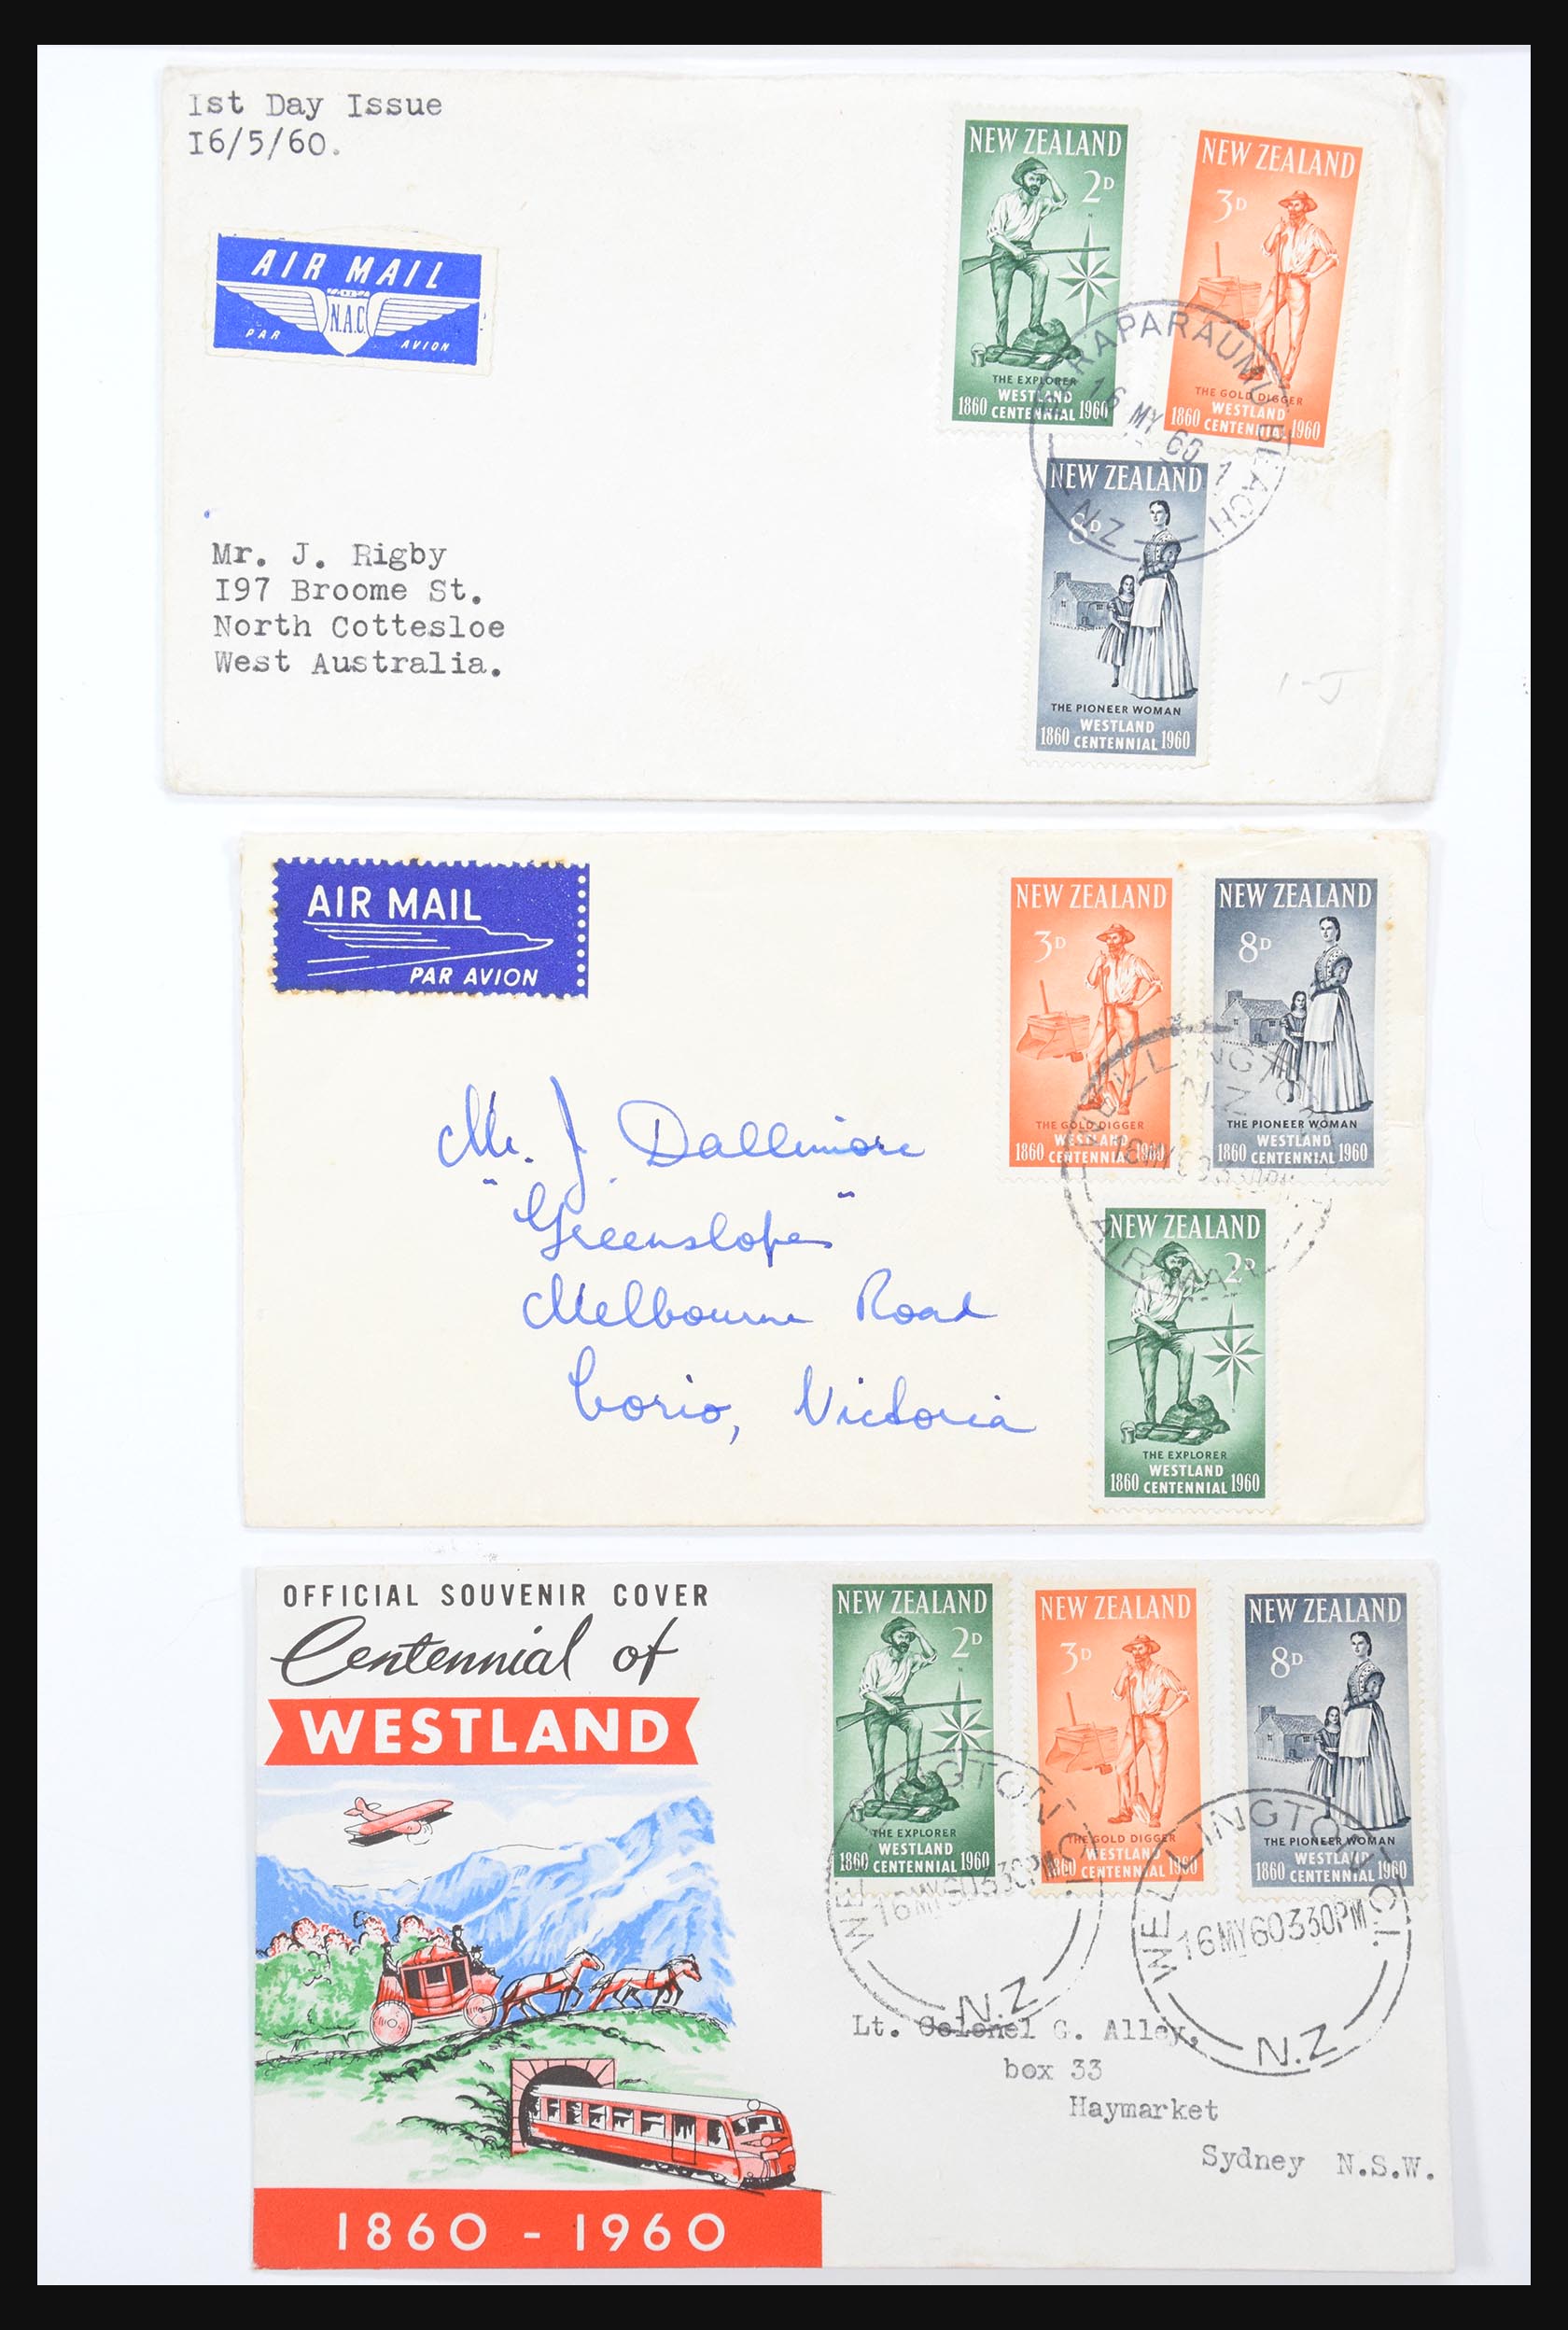 30821 005 - 30821 New Zealand FDC's 1960-1971.